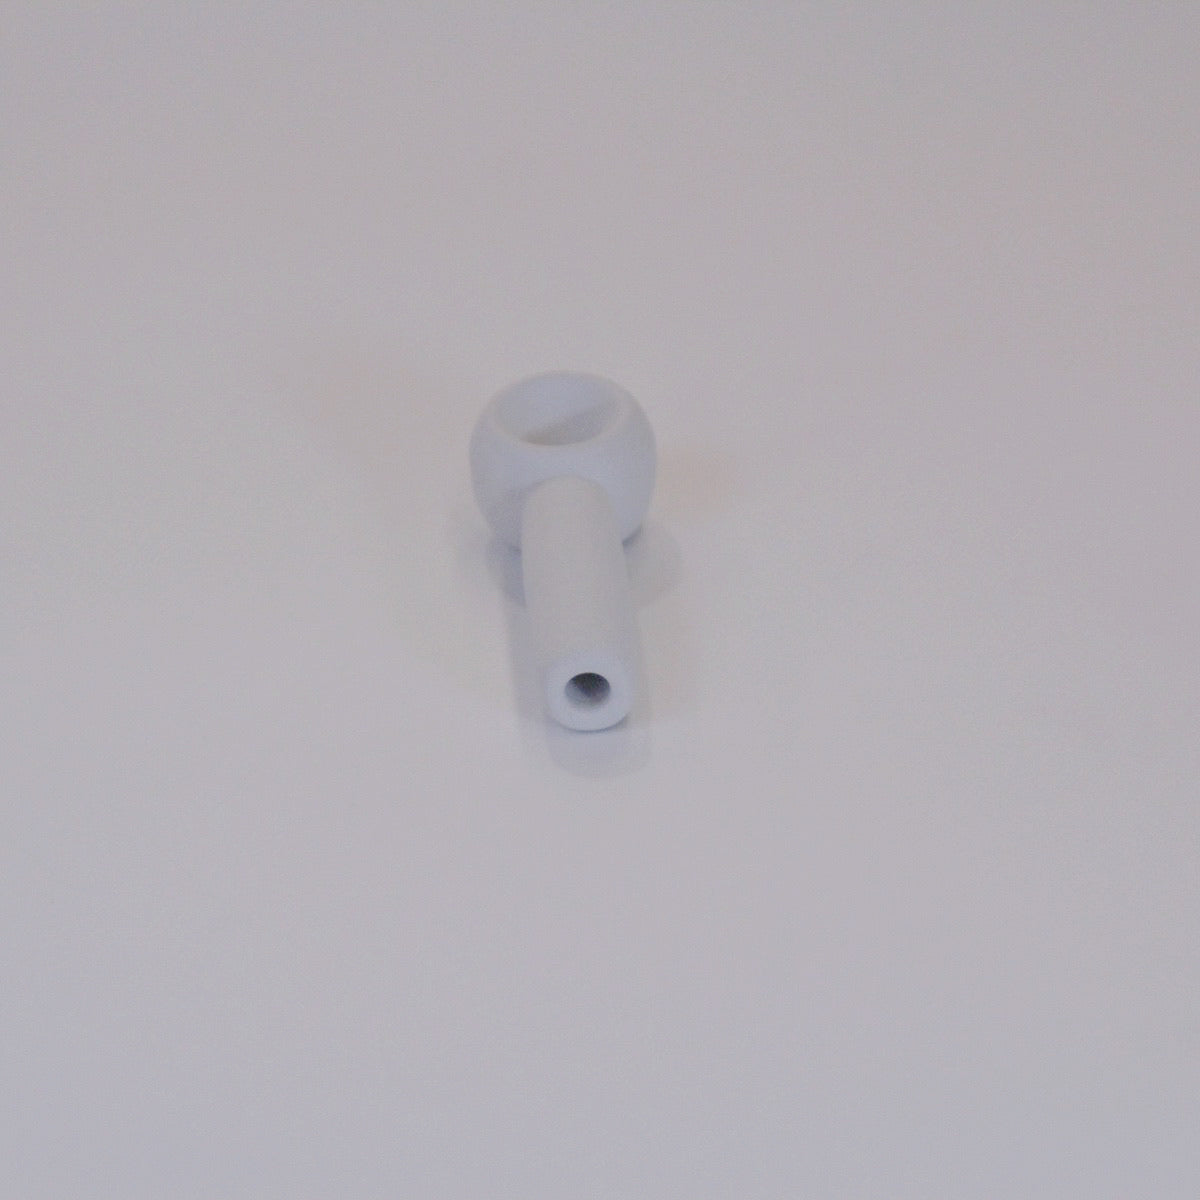 Spoon 2.0 Pipe Mold